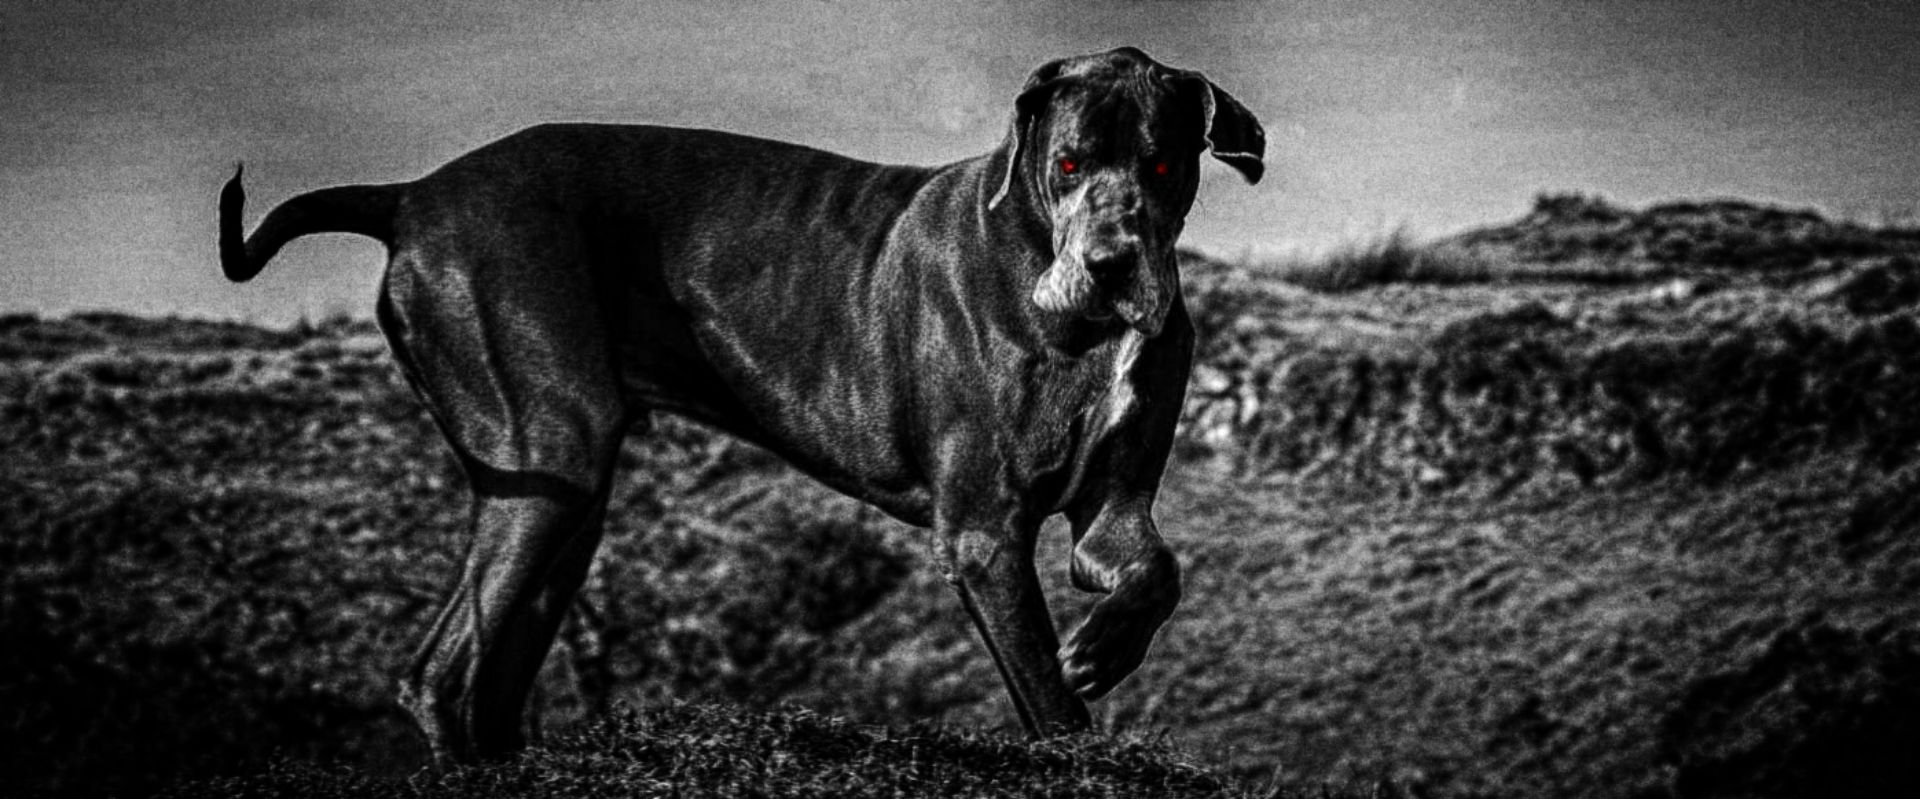 The Hound of the Baskervilles on Dartmoor